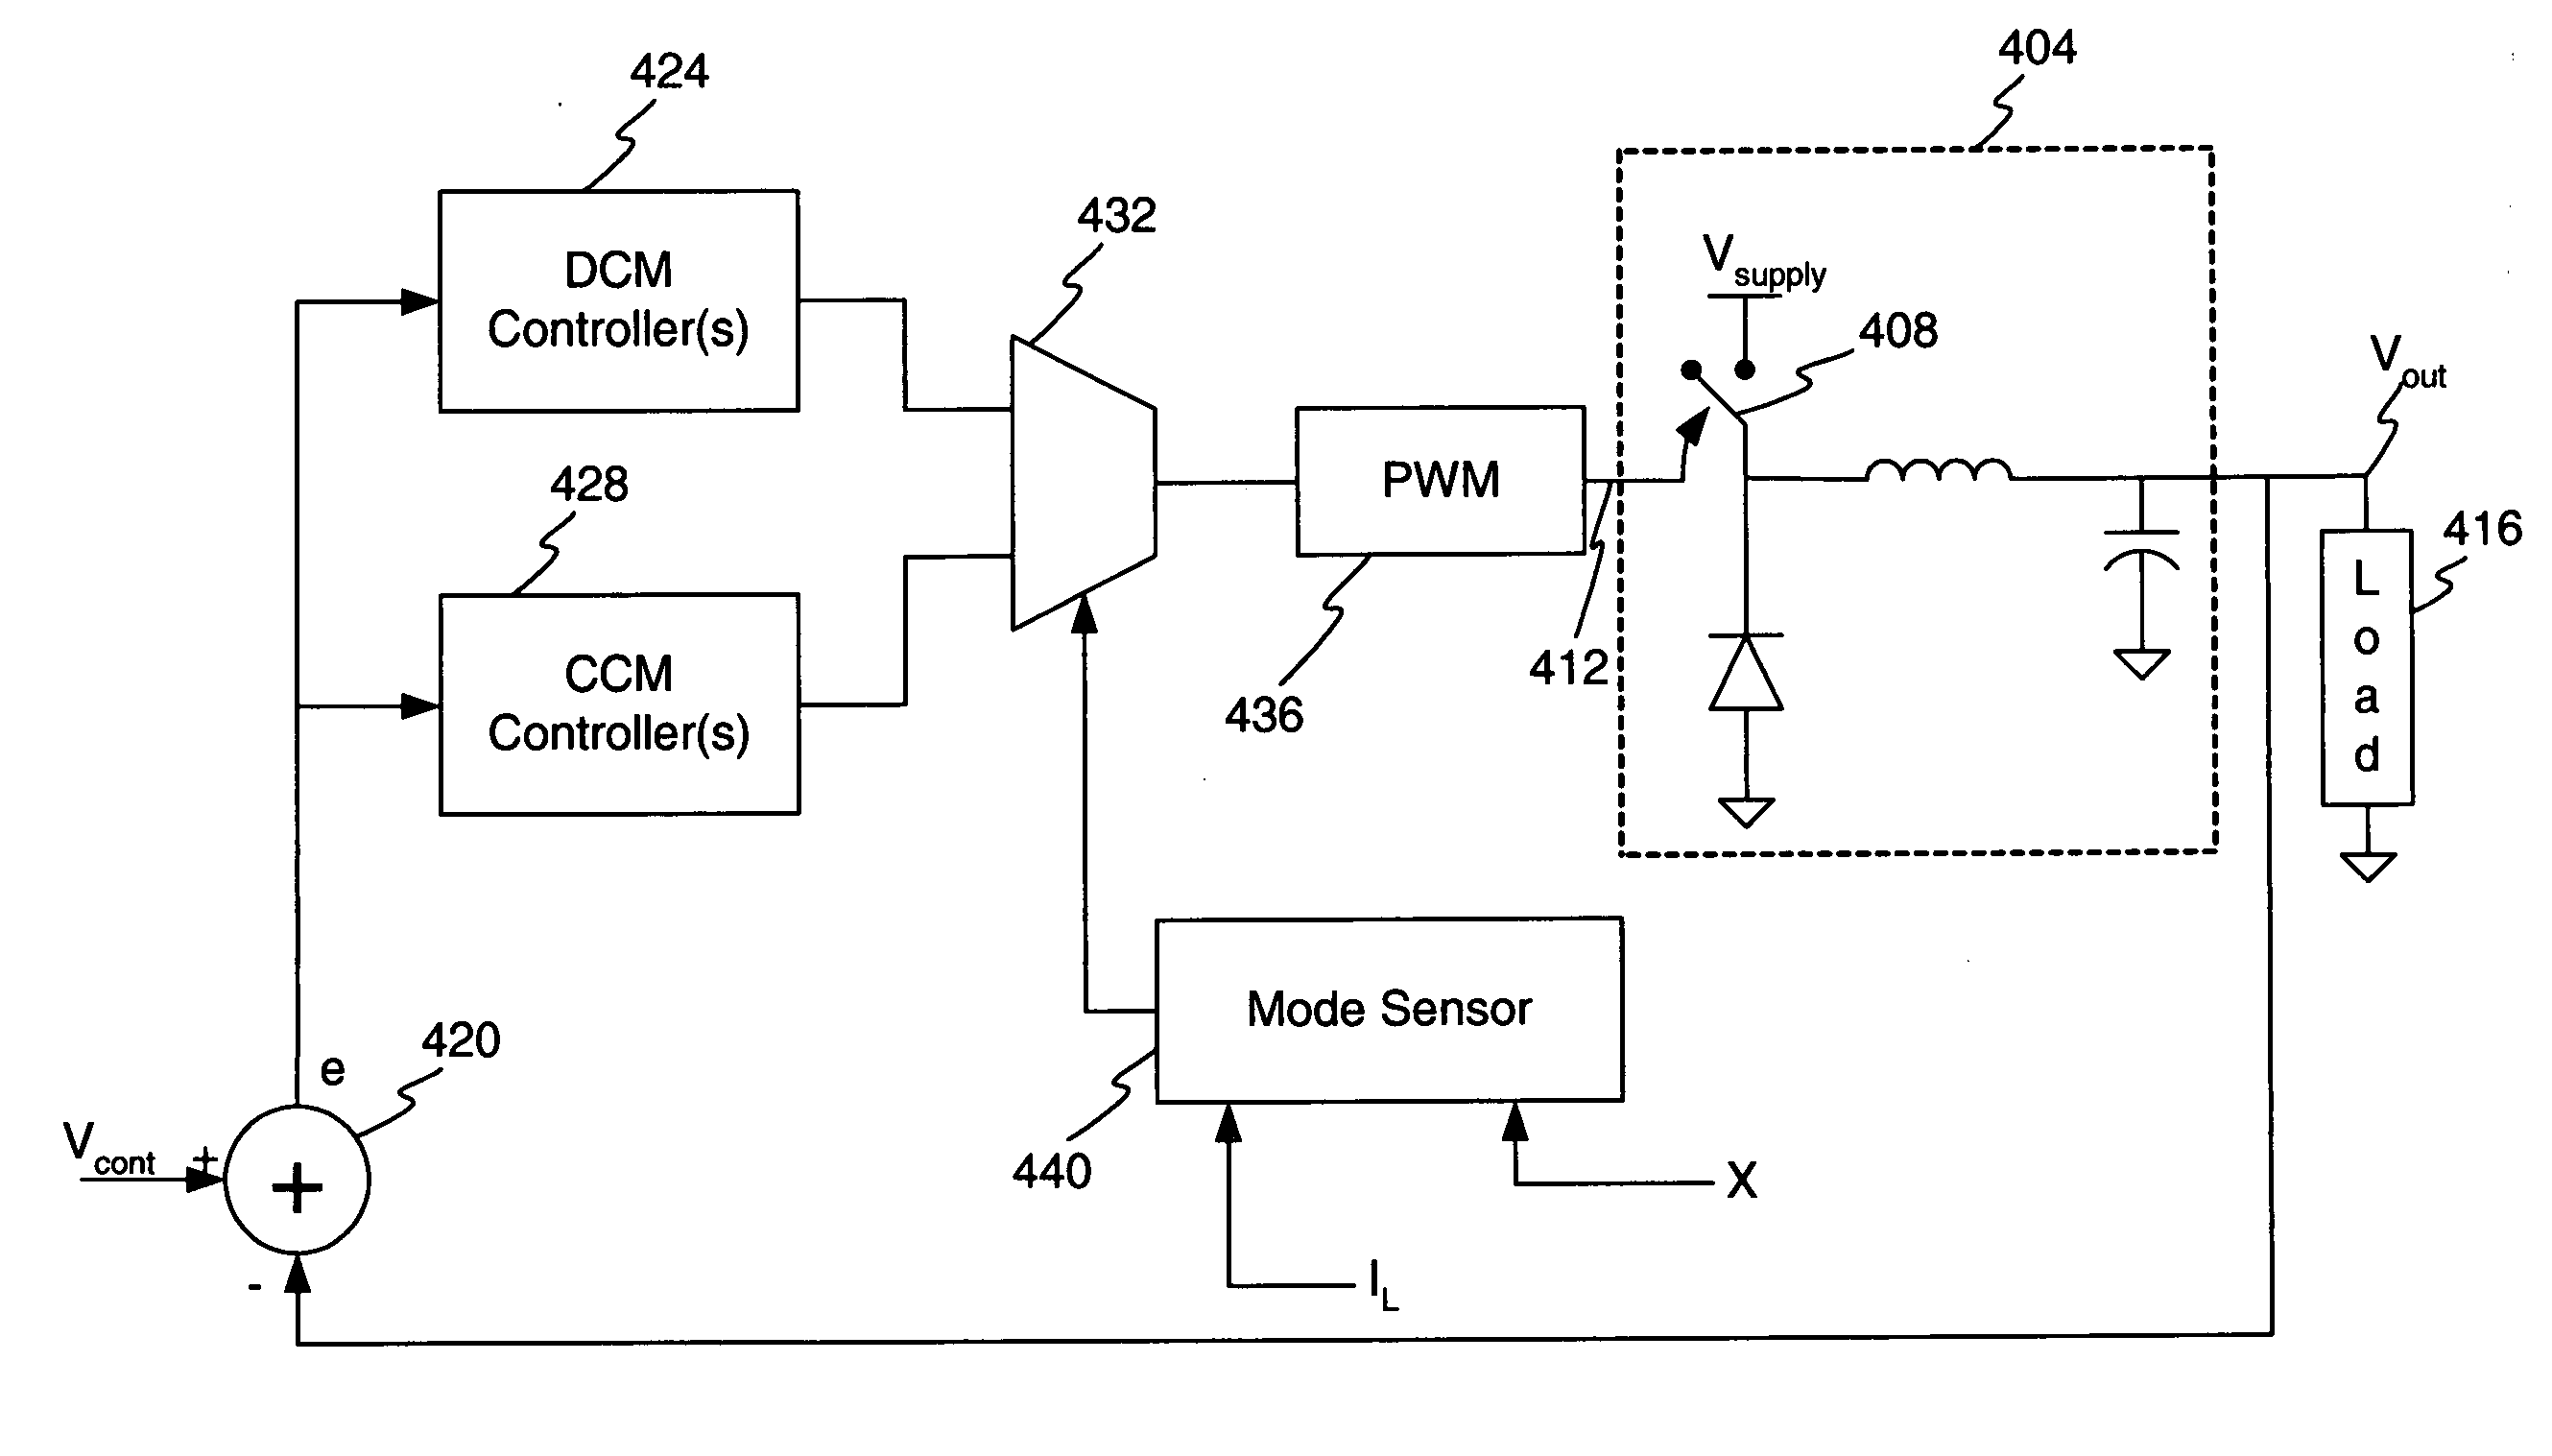 Switched mode power converter